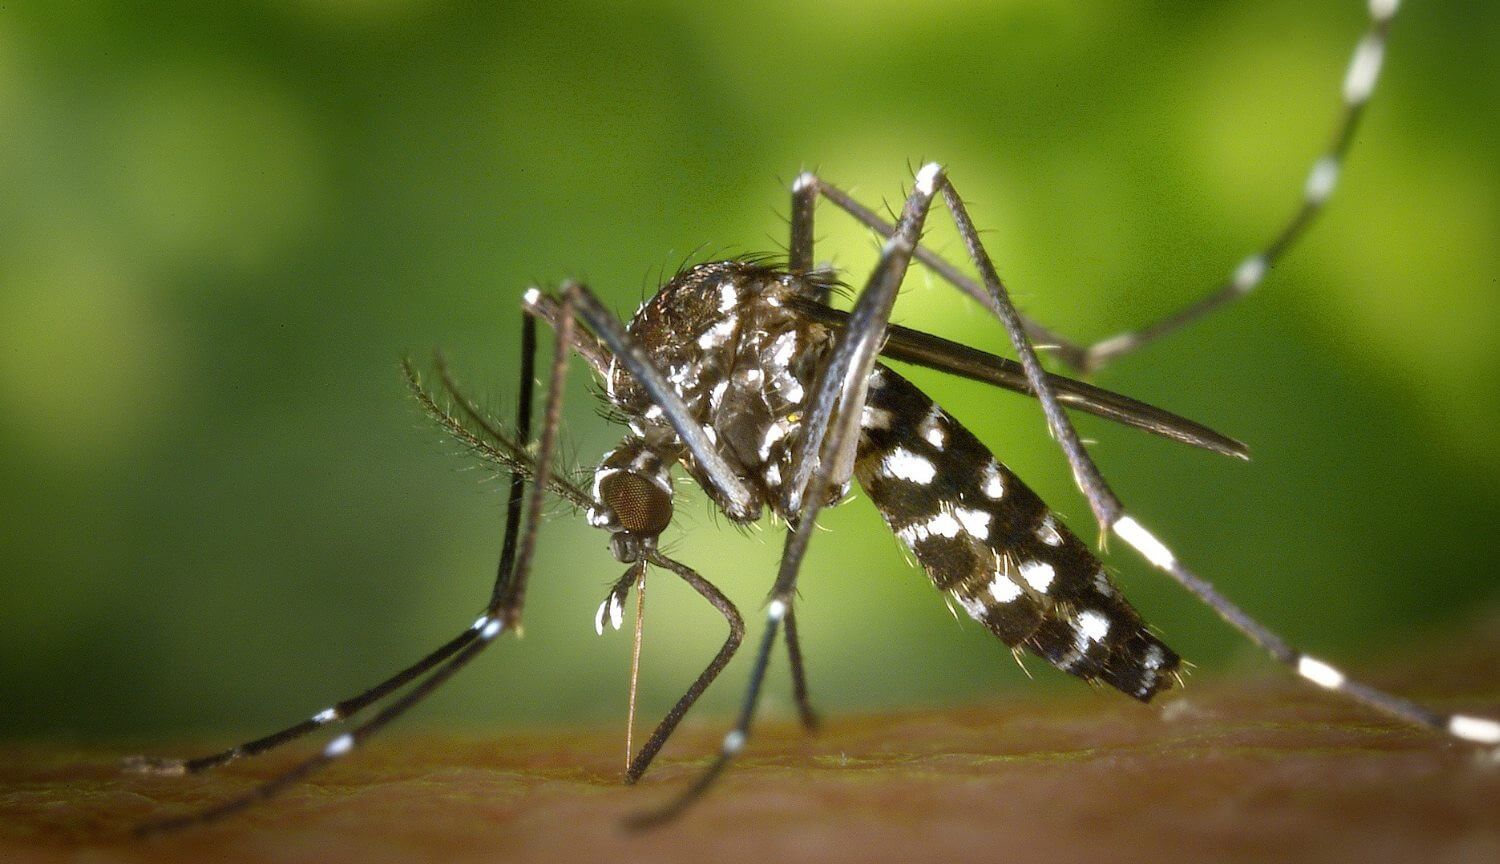 Radiation and biological weapons destroyed mosquitoes in China